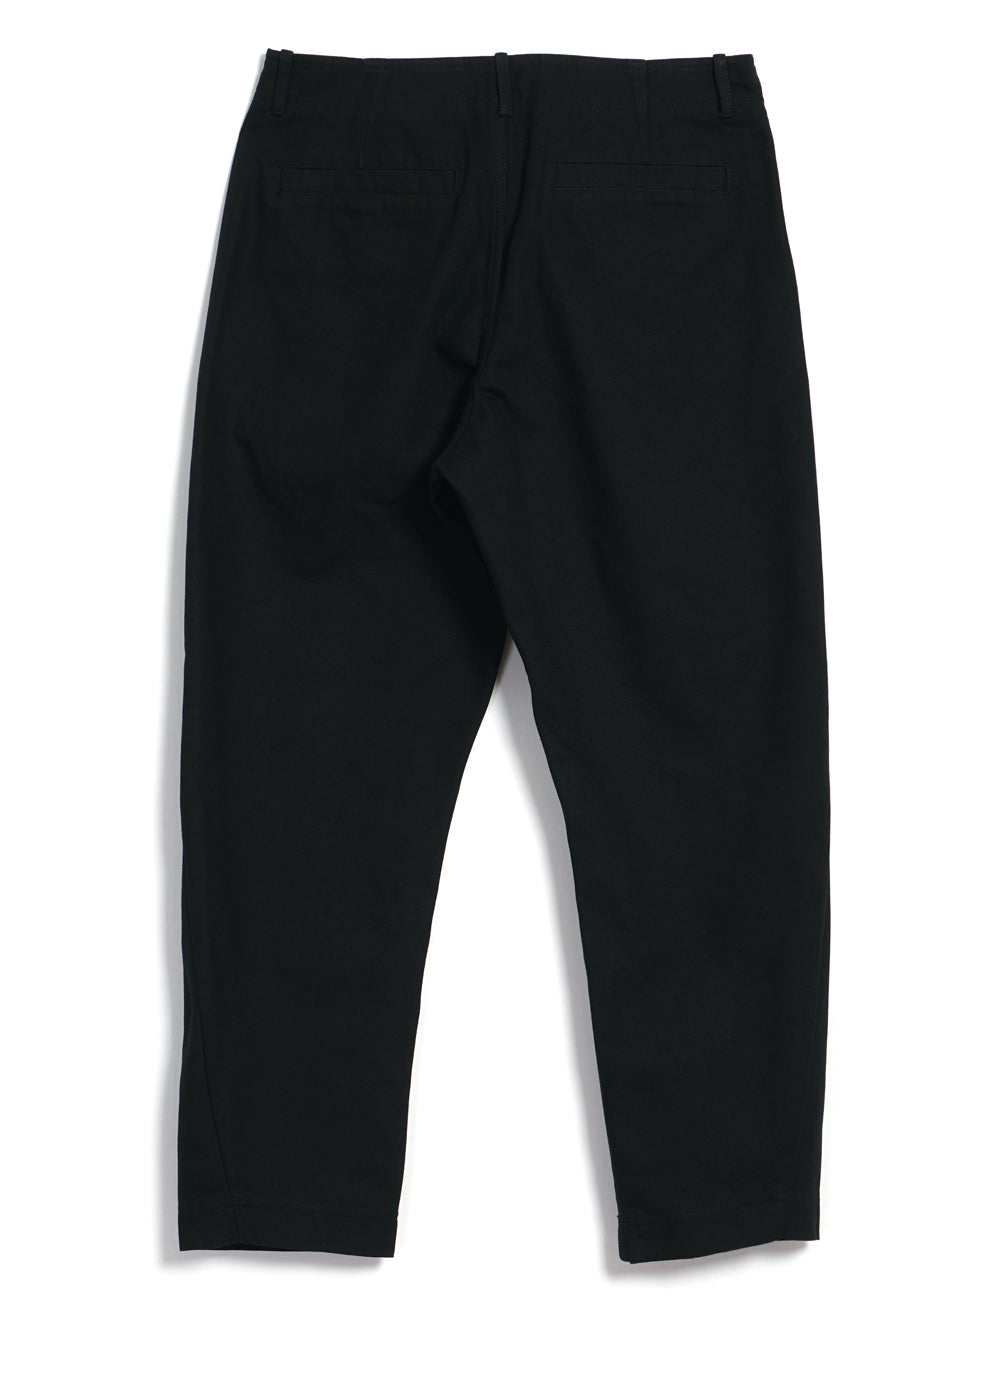 TRYGVE | Wide Cut Cropped Trousers | Black Canvas